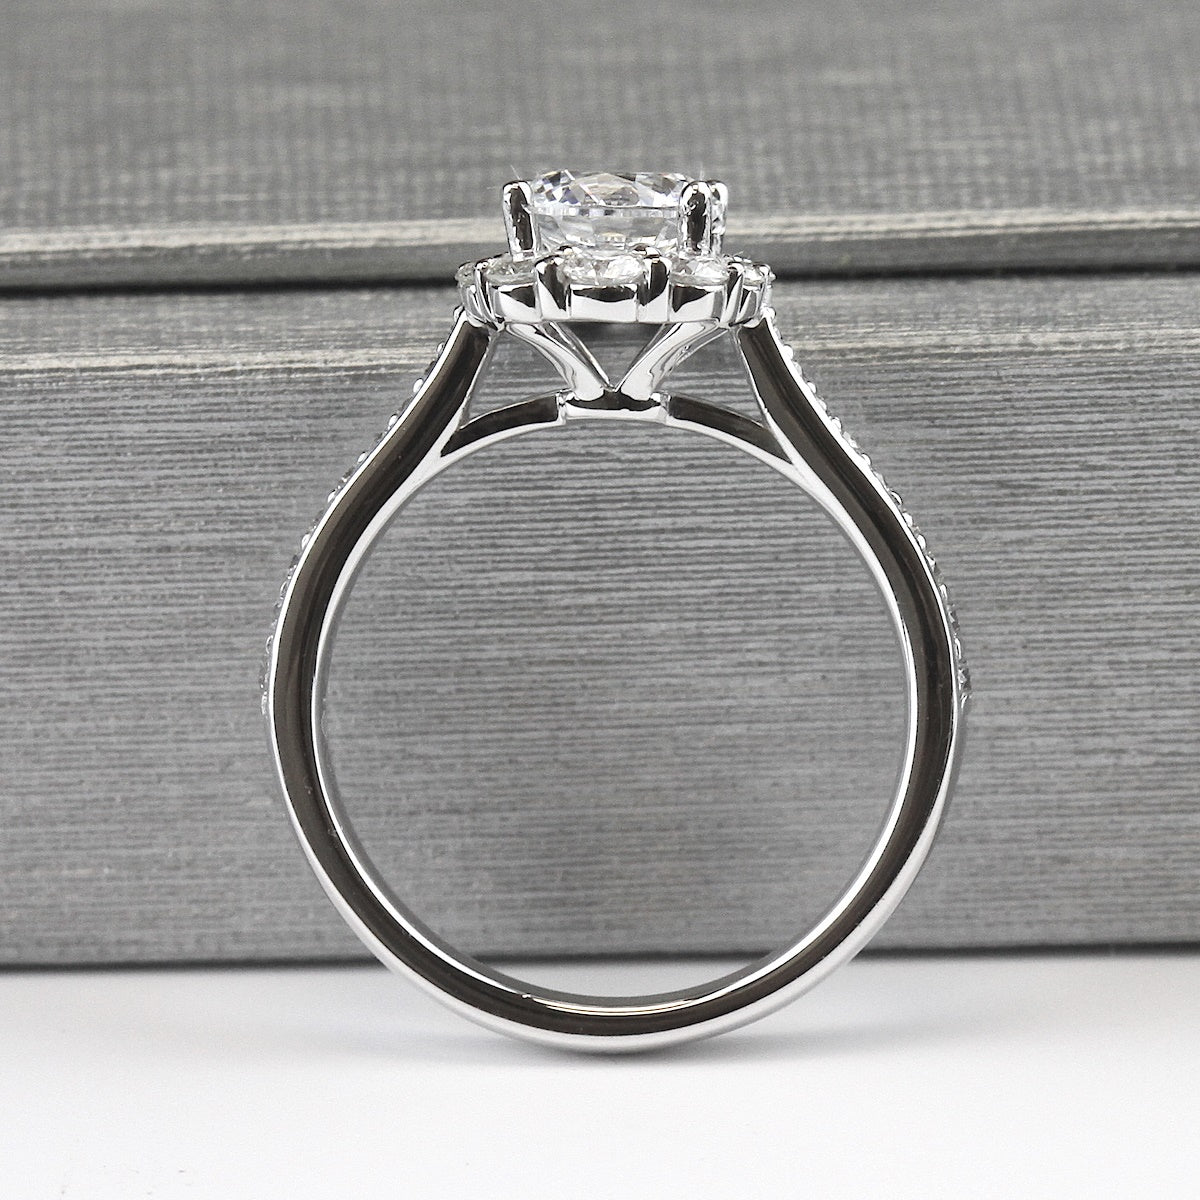 14KY Semi-Mount Solitaire Engagement Ring with Elongated Halo